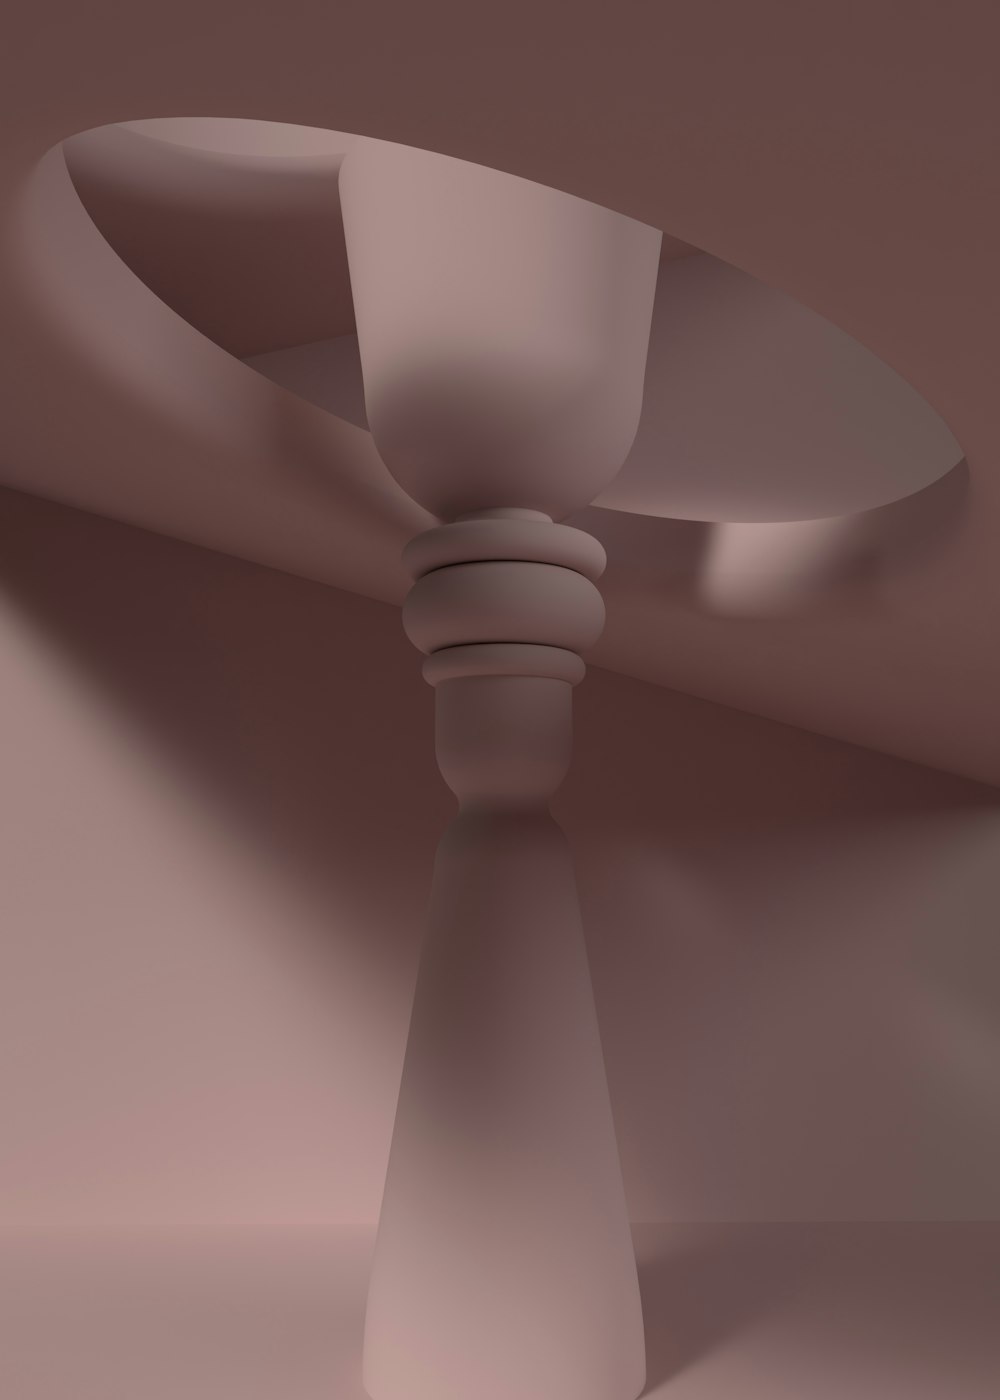 a white ceiling fan in a room with a brown wall